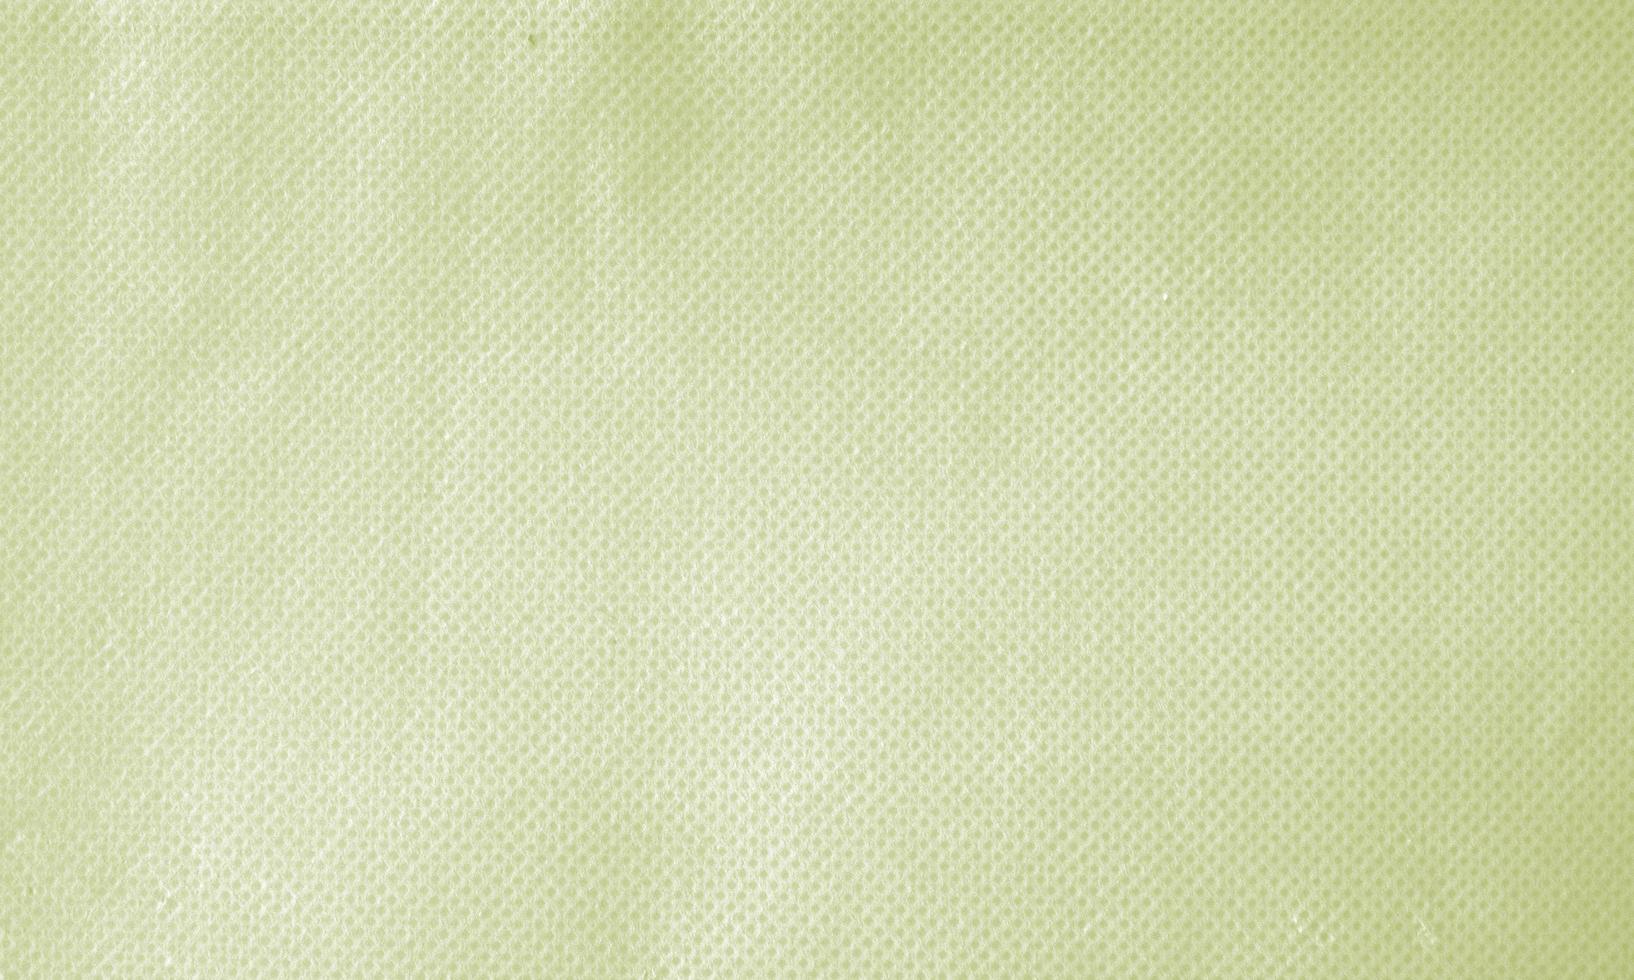 Cream wrinkled fabric texture for background photo